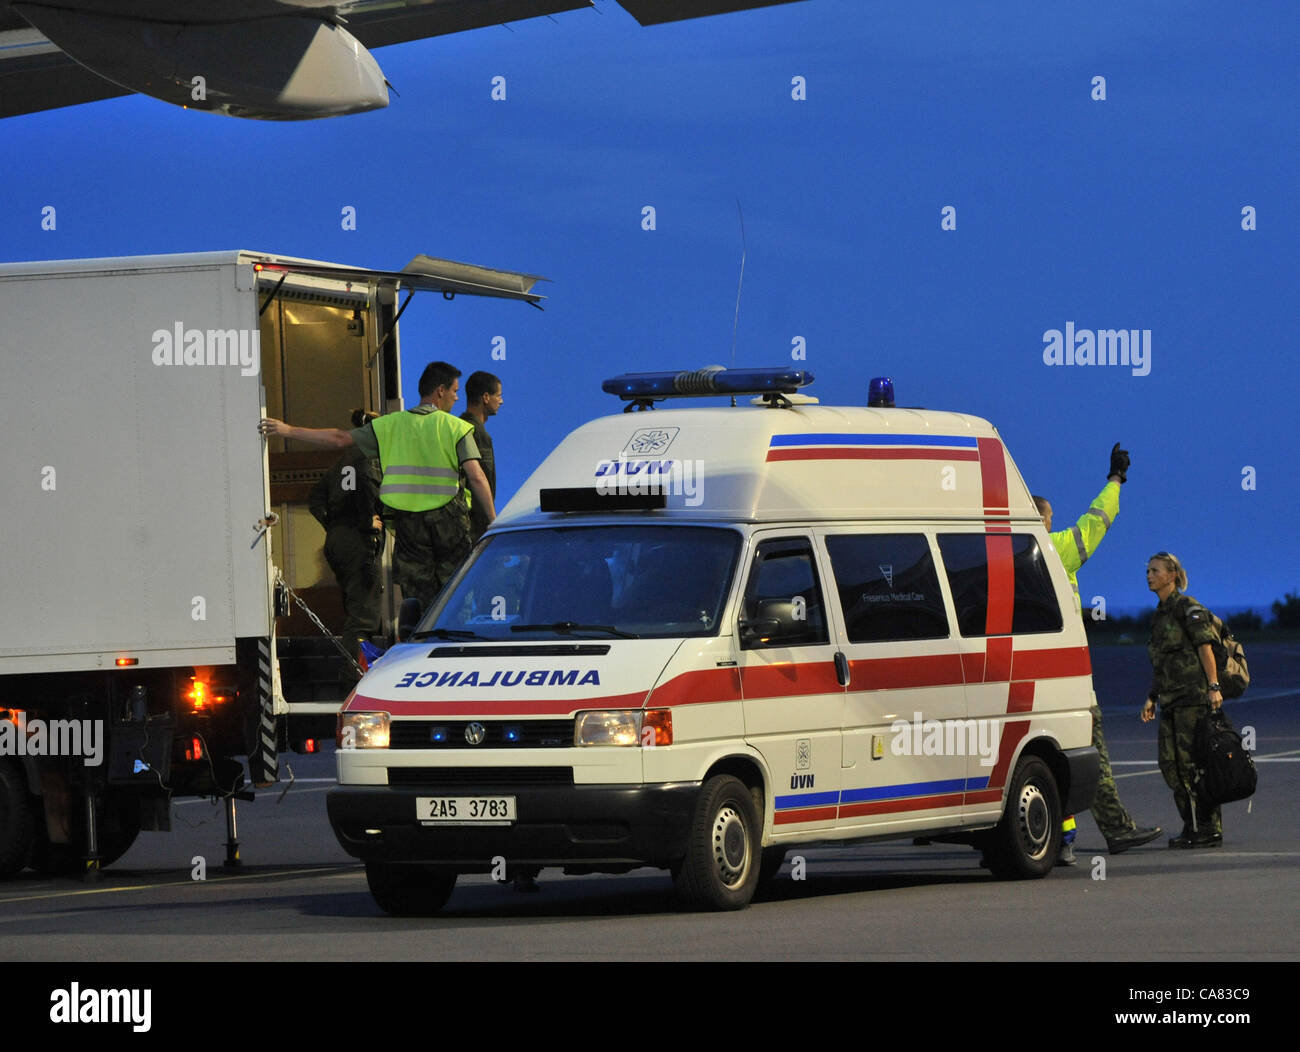 The Airplane of the Czech Air Force with the Czech tourists who crashed with the bus in Croatia, landed in Brno, Czech Republic on June 24, 2012. The ambulance cars transport the injured. The bus with Czech tourists crashed near Gospic, Croatia, Saturday, June 23, 2012. Eight tourists were killed and 51 injured in a bus crash on a major highway in Croatia early Saturday, police said. The accident happened some 200 kilometers (124 miles) south of Zagreb, on the highway connecting the Croatian capital with the central Adriatic coastal city of Split. (CTK Photo/Stanislav Peska) Stock Photo